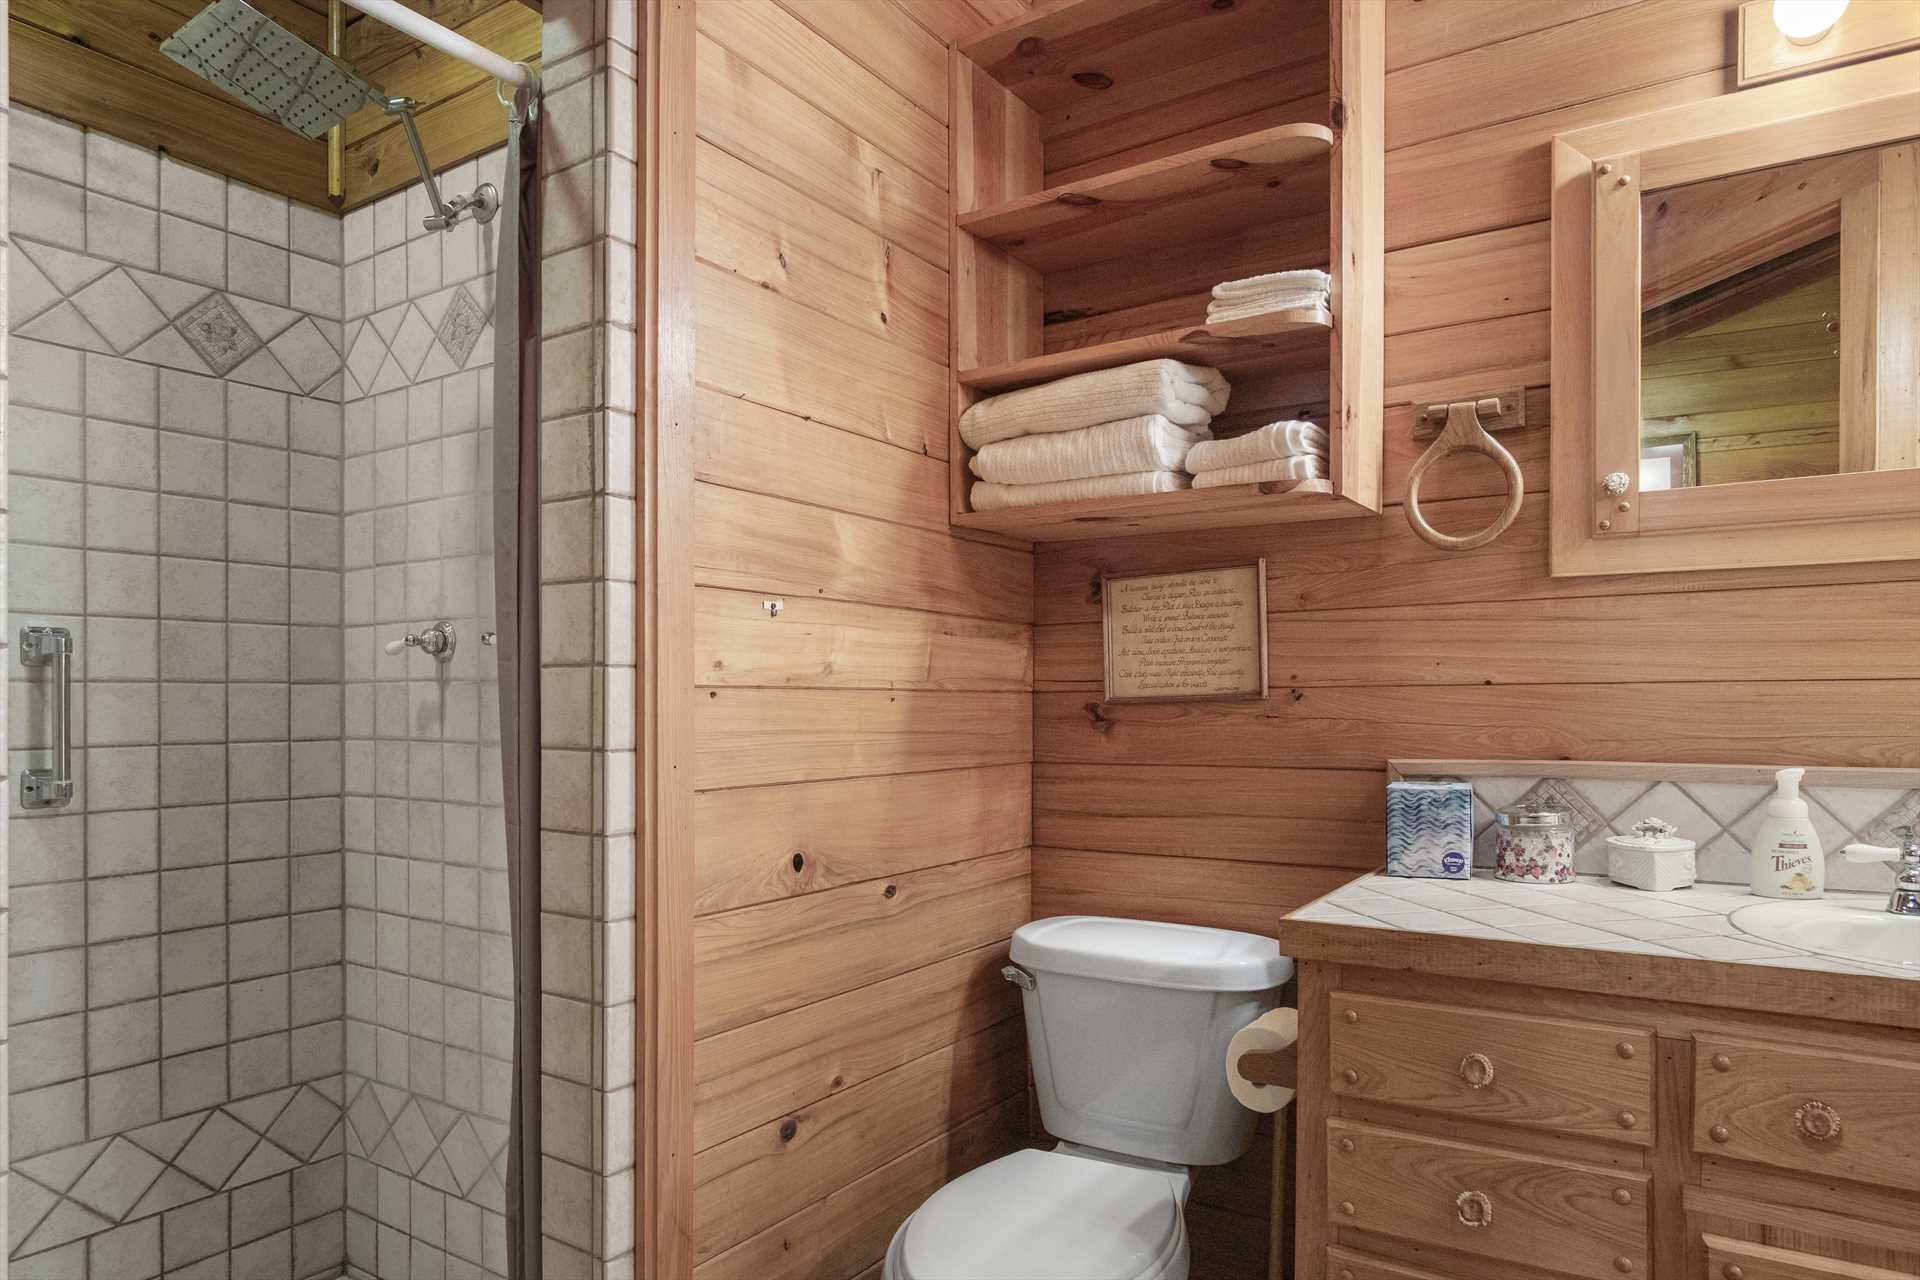                                                 Clean linens and a spotless shower stall make cleanup a breeze in the Whitetail Room bath.